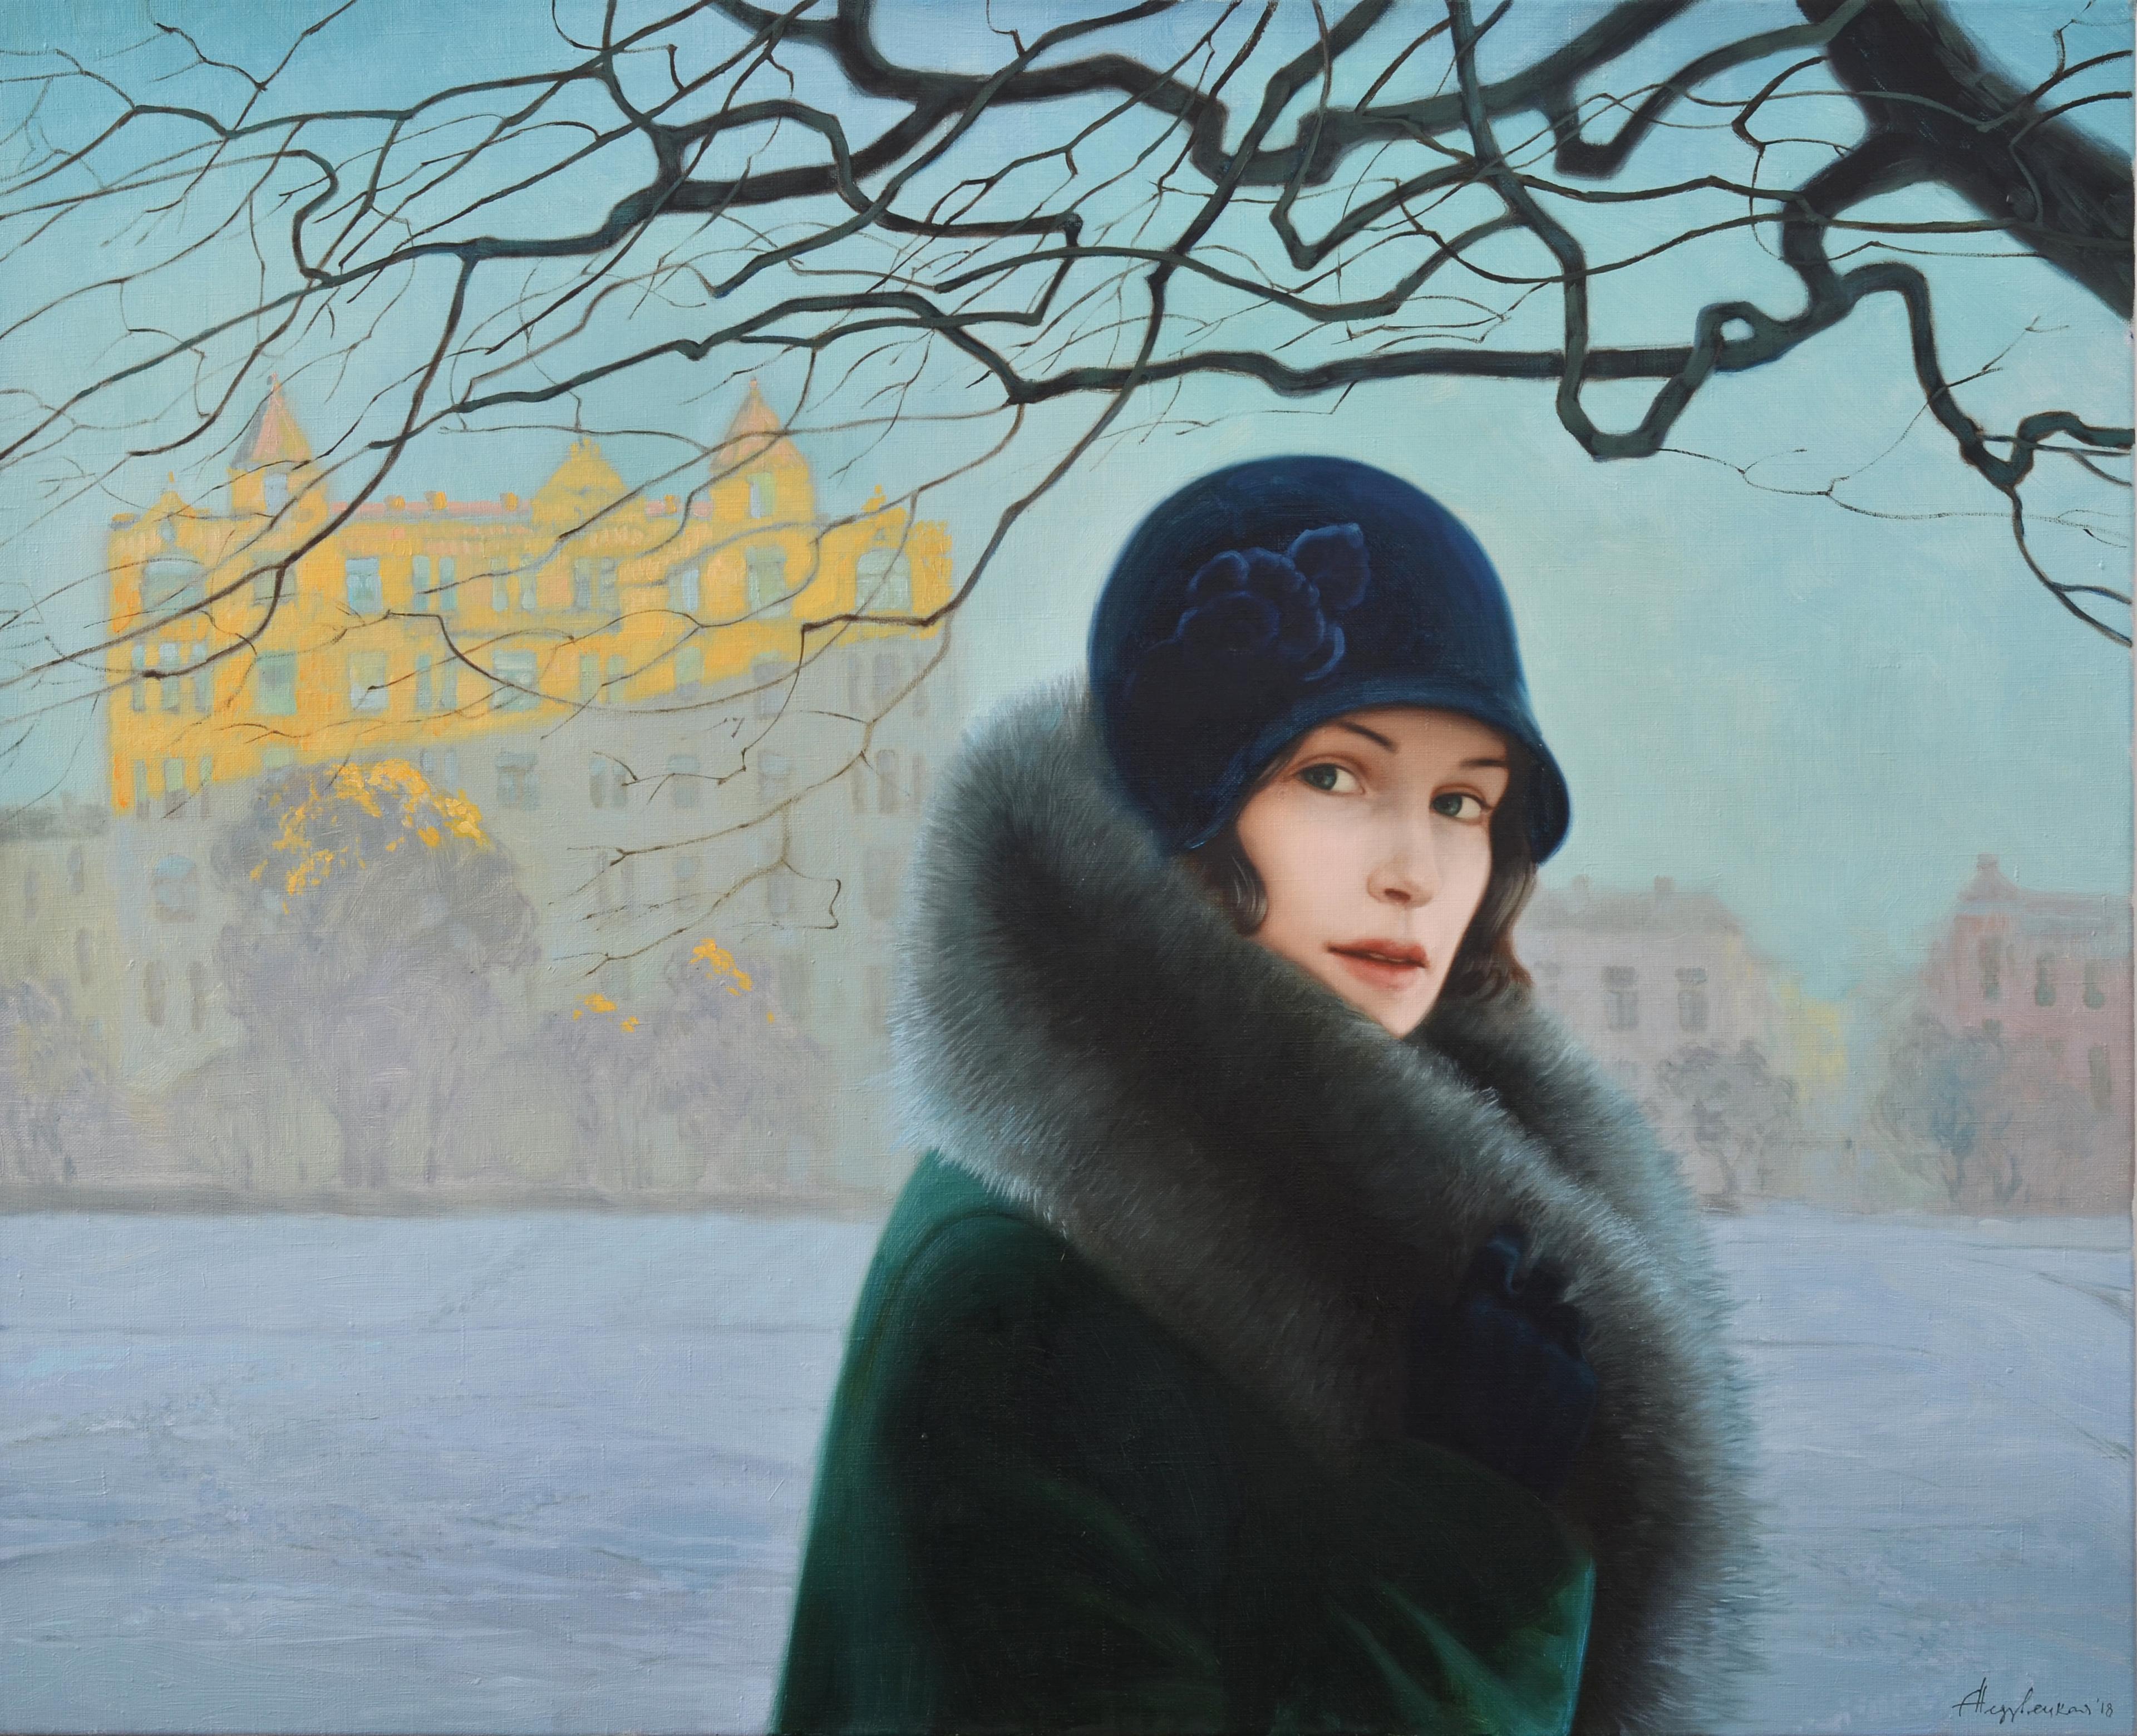 Margarita at the Patriarch's Ponds <Br>
90x110 cm, oil on canvas